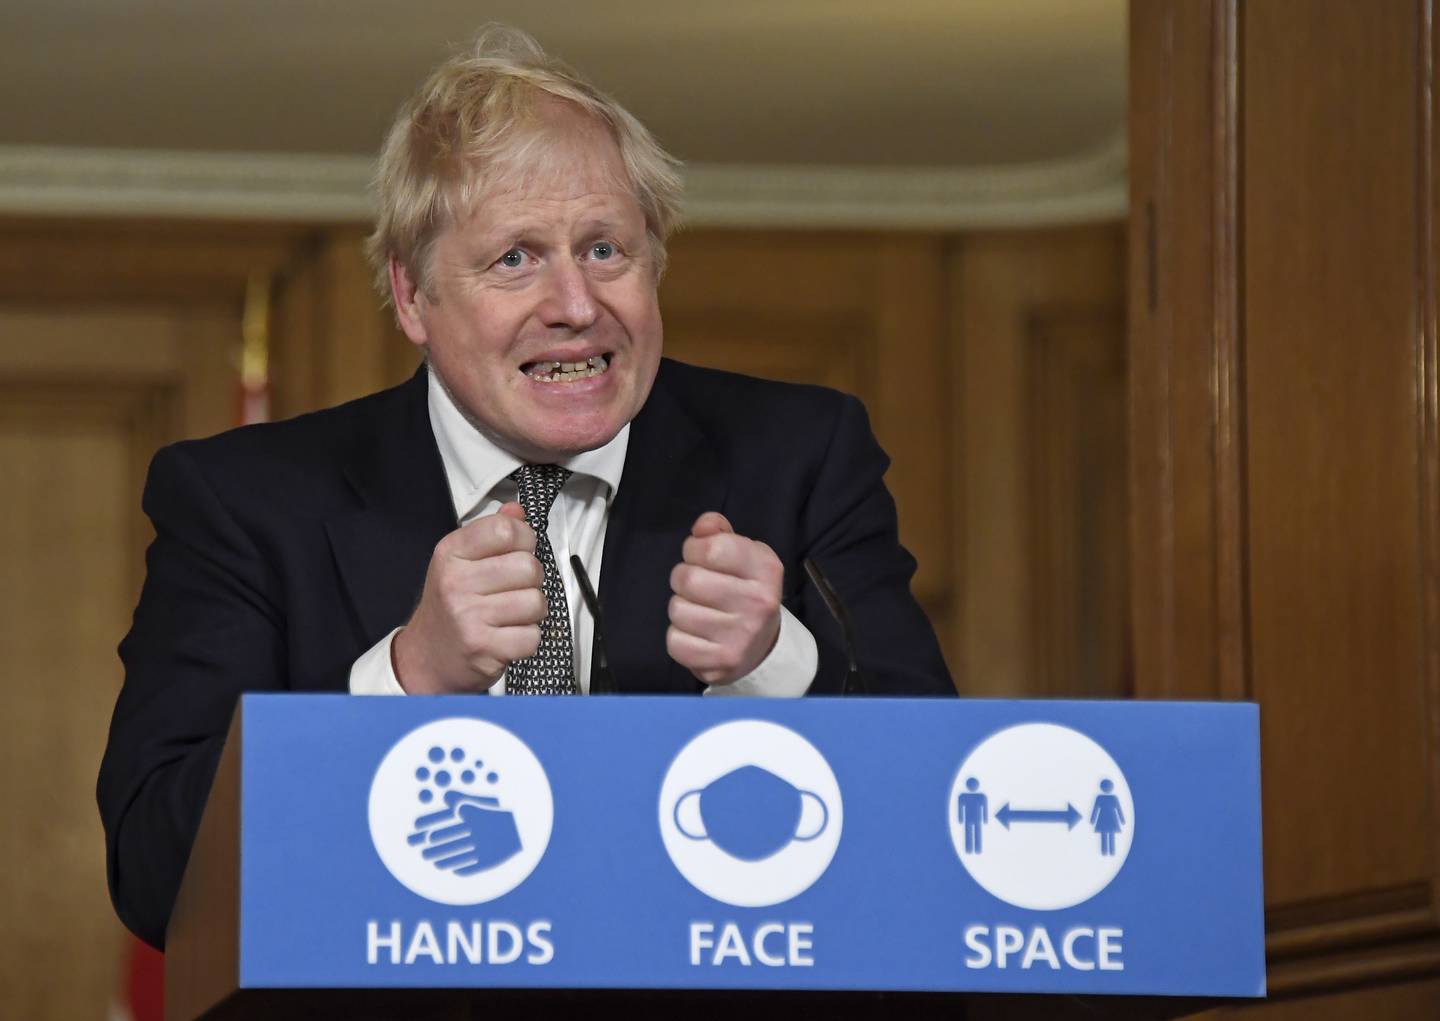 Boris Johnson gestures during a press conference in 10 Downing Street on October 31, 2020, when he announced a new four-week lockdown across England. Getty Images